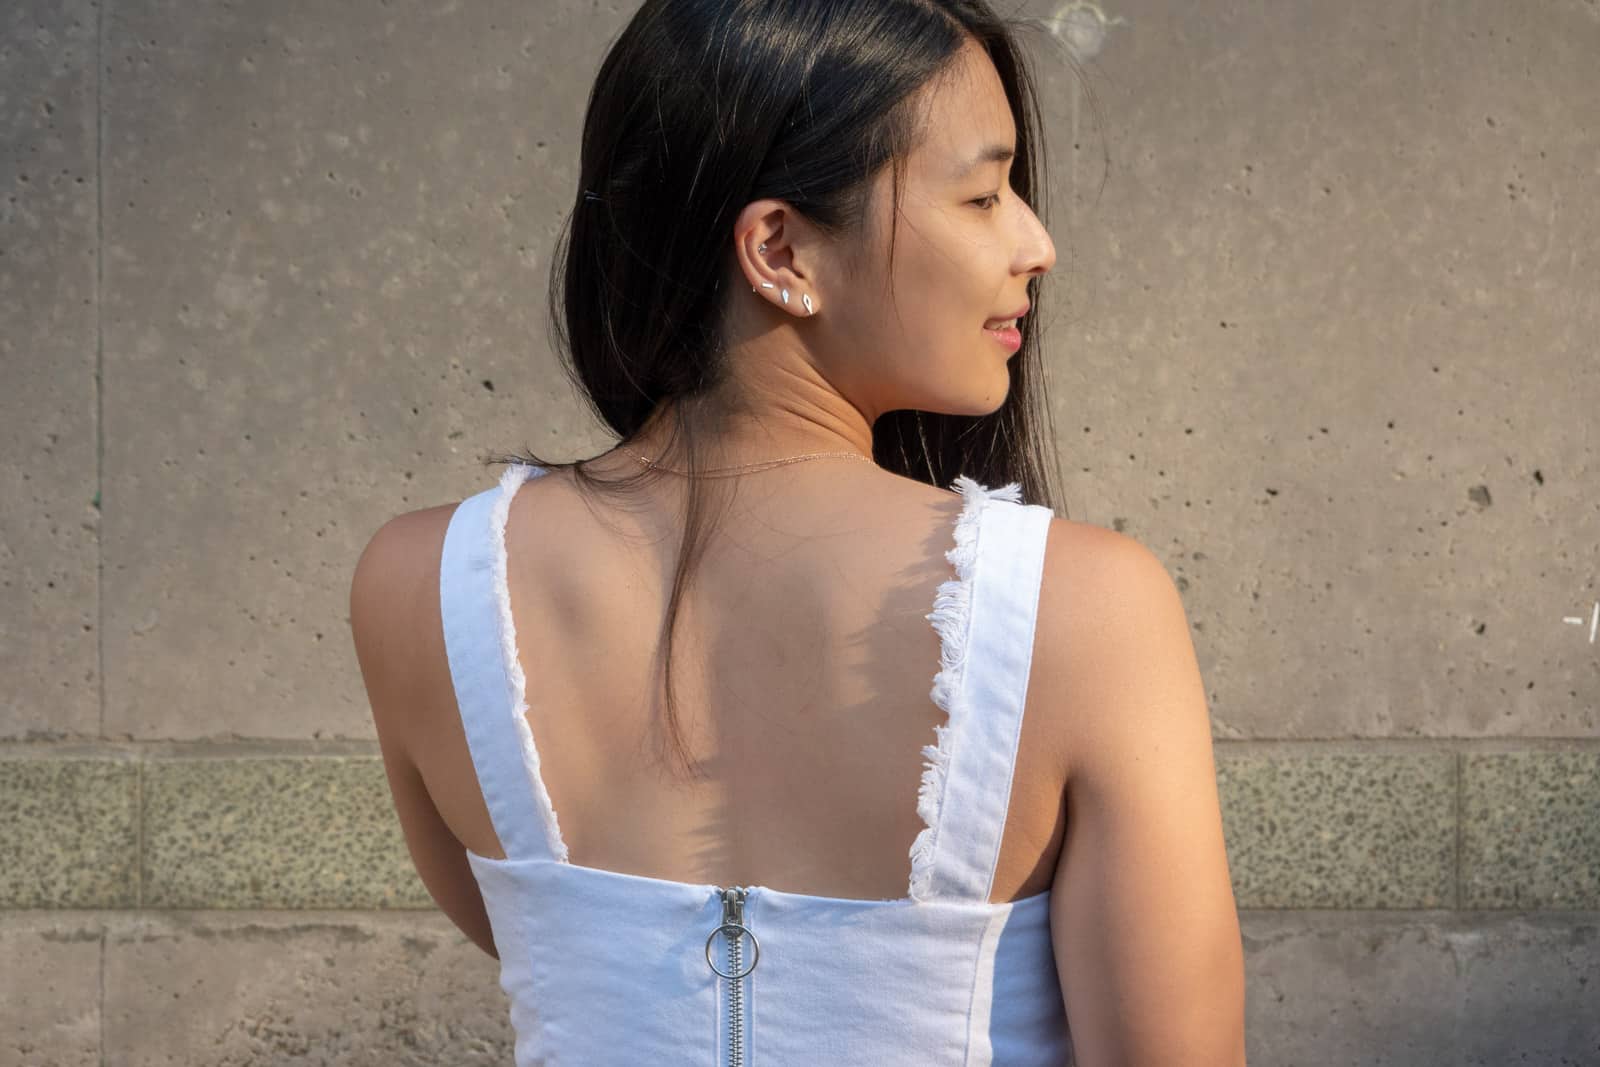 From behind, a woman facing the right, with the O-ring pull zipper of her strapless white top visible. Some of the woman’s dark hair falls across her back